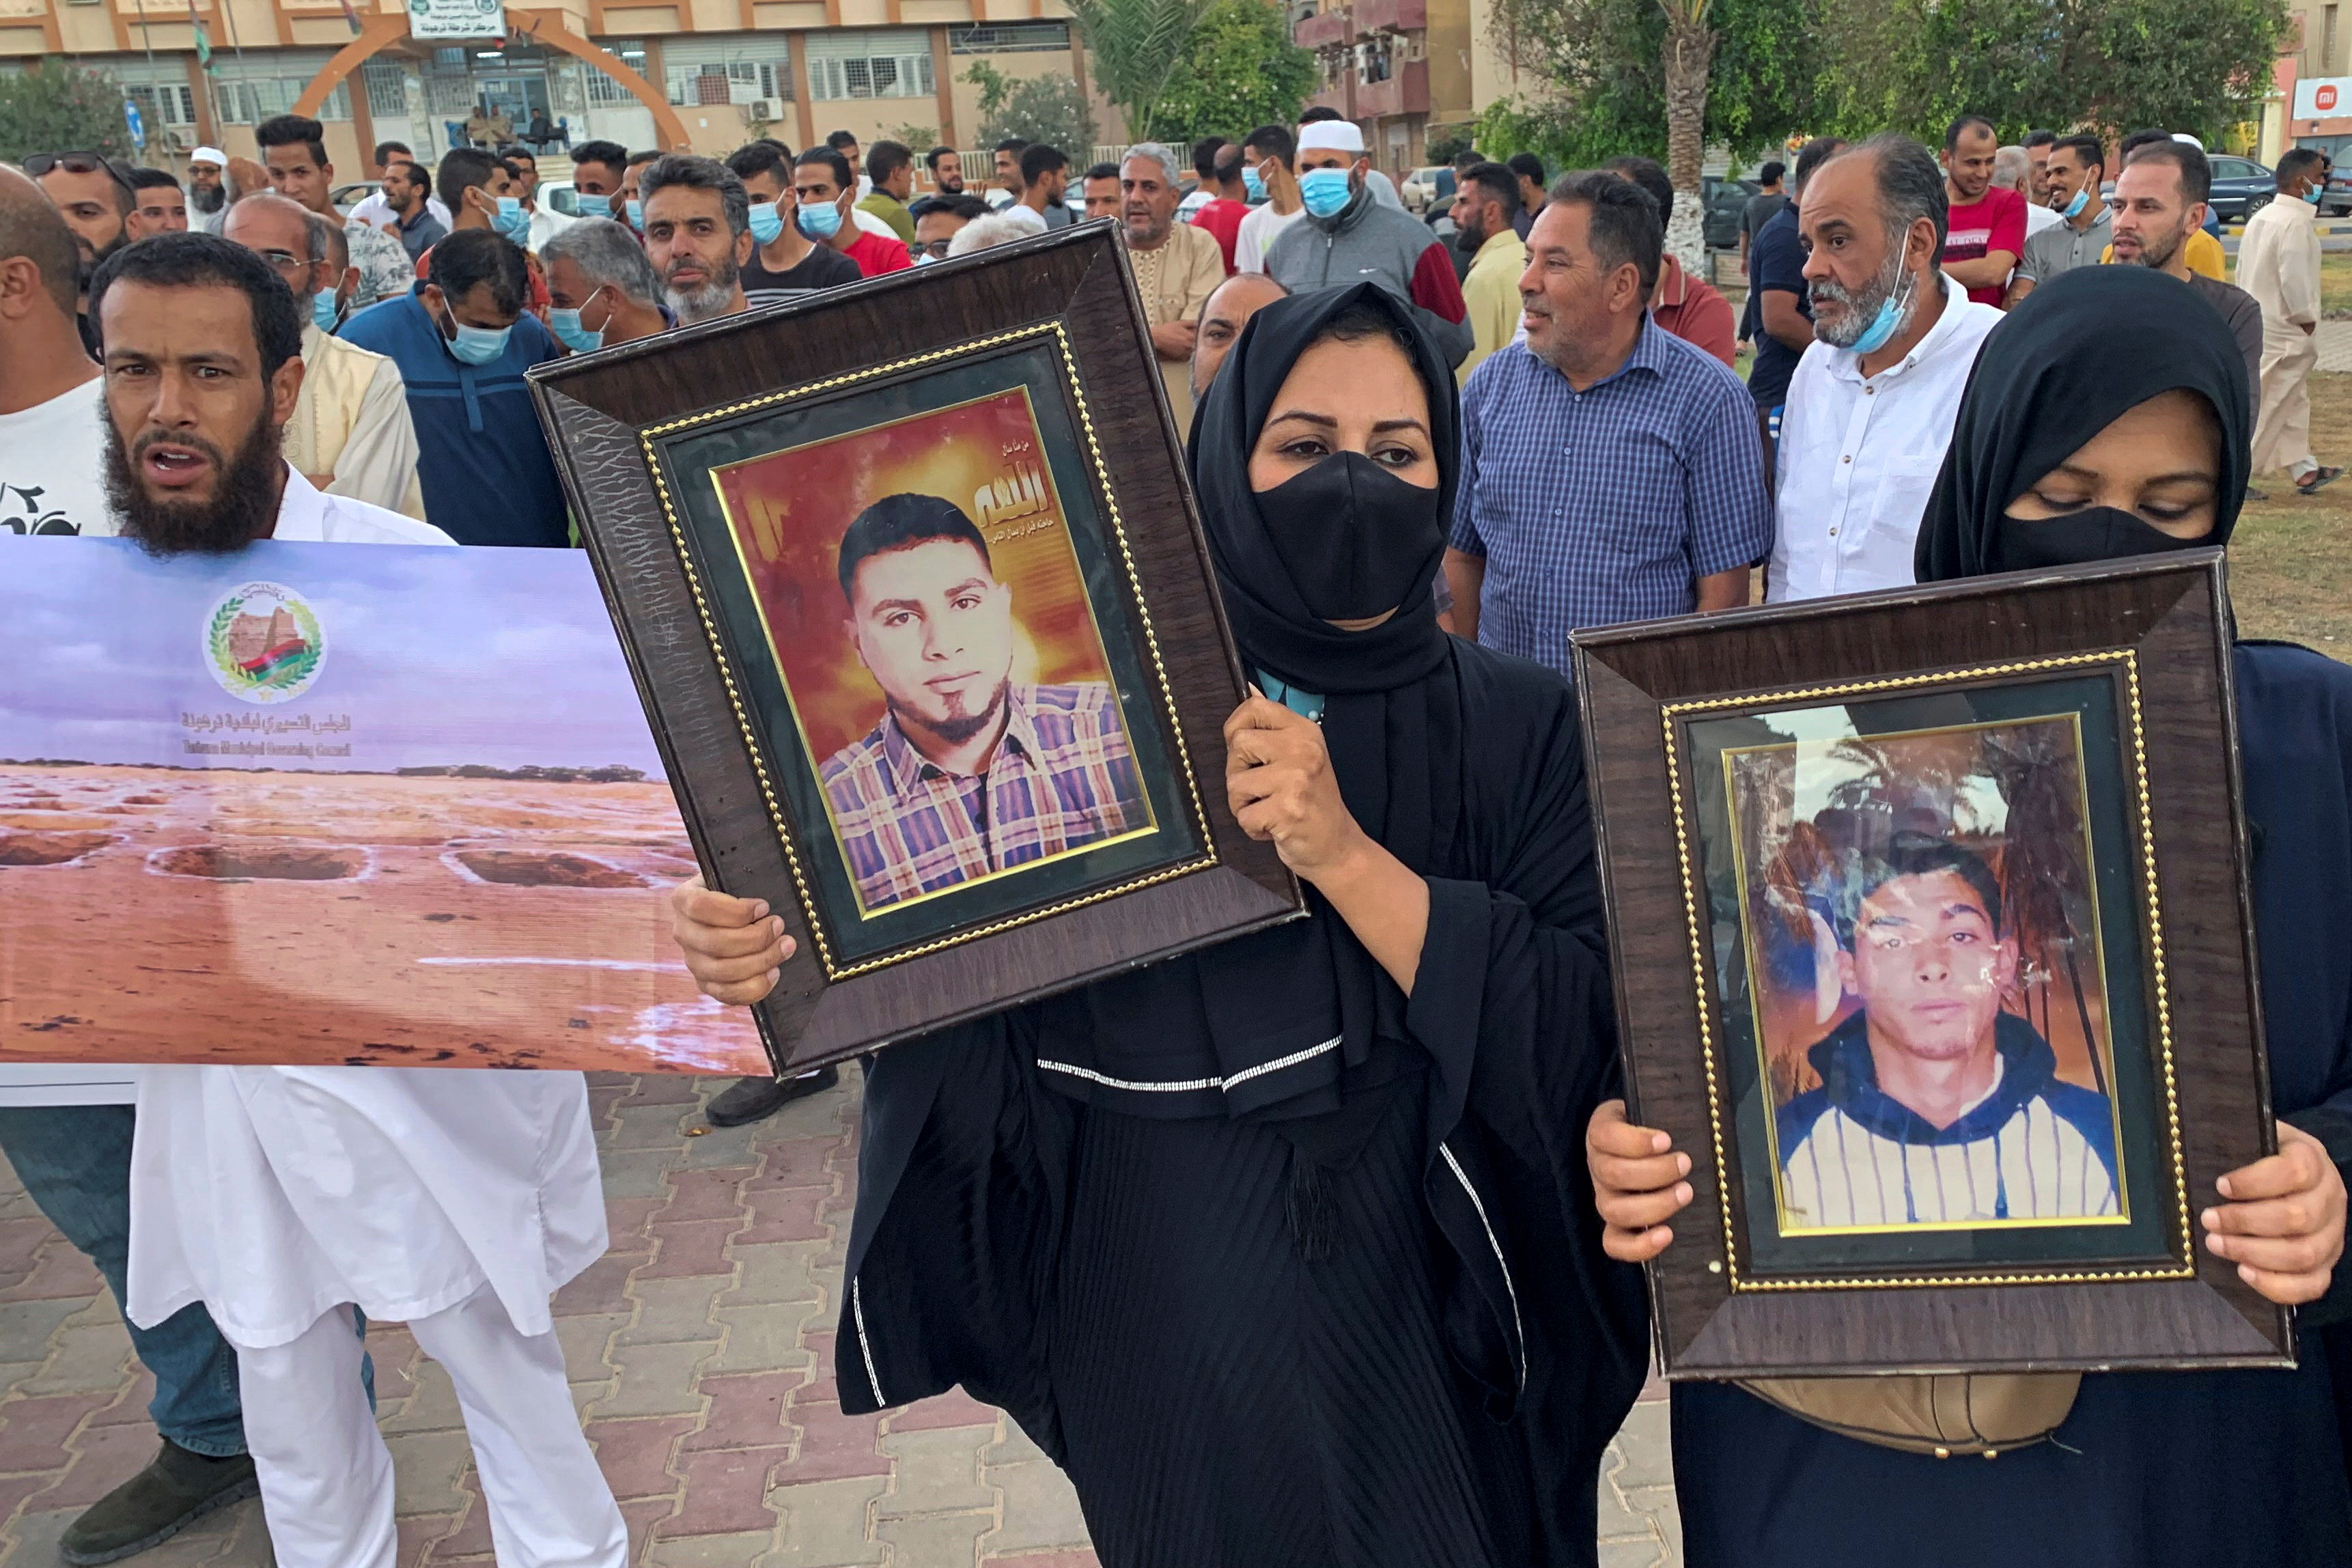 Families hold pictures of victims as they demand justice for missing loved ones and mass graves in Tarhouna, Libya, Oct. 9, 2021.  REUTERS/Ayman Al-Sahili